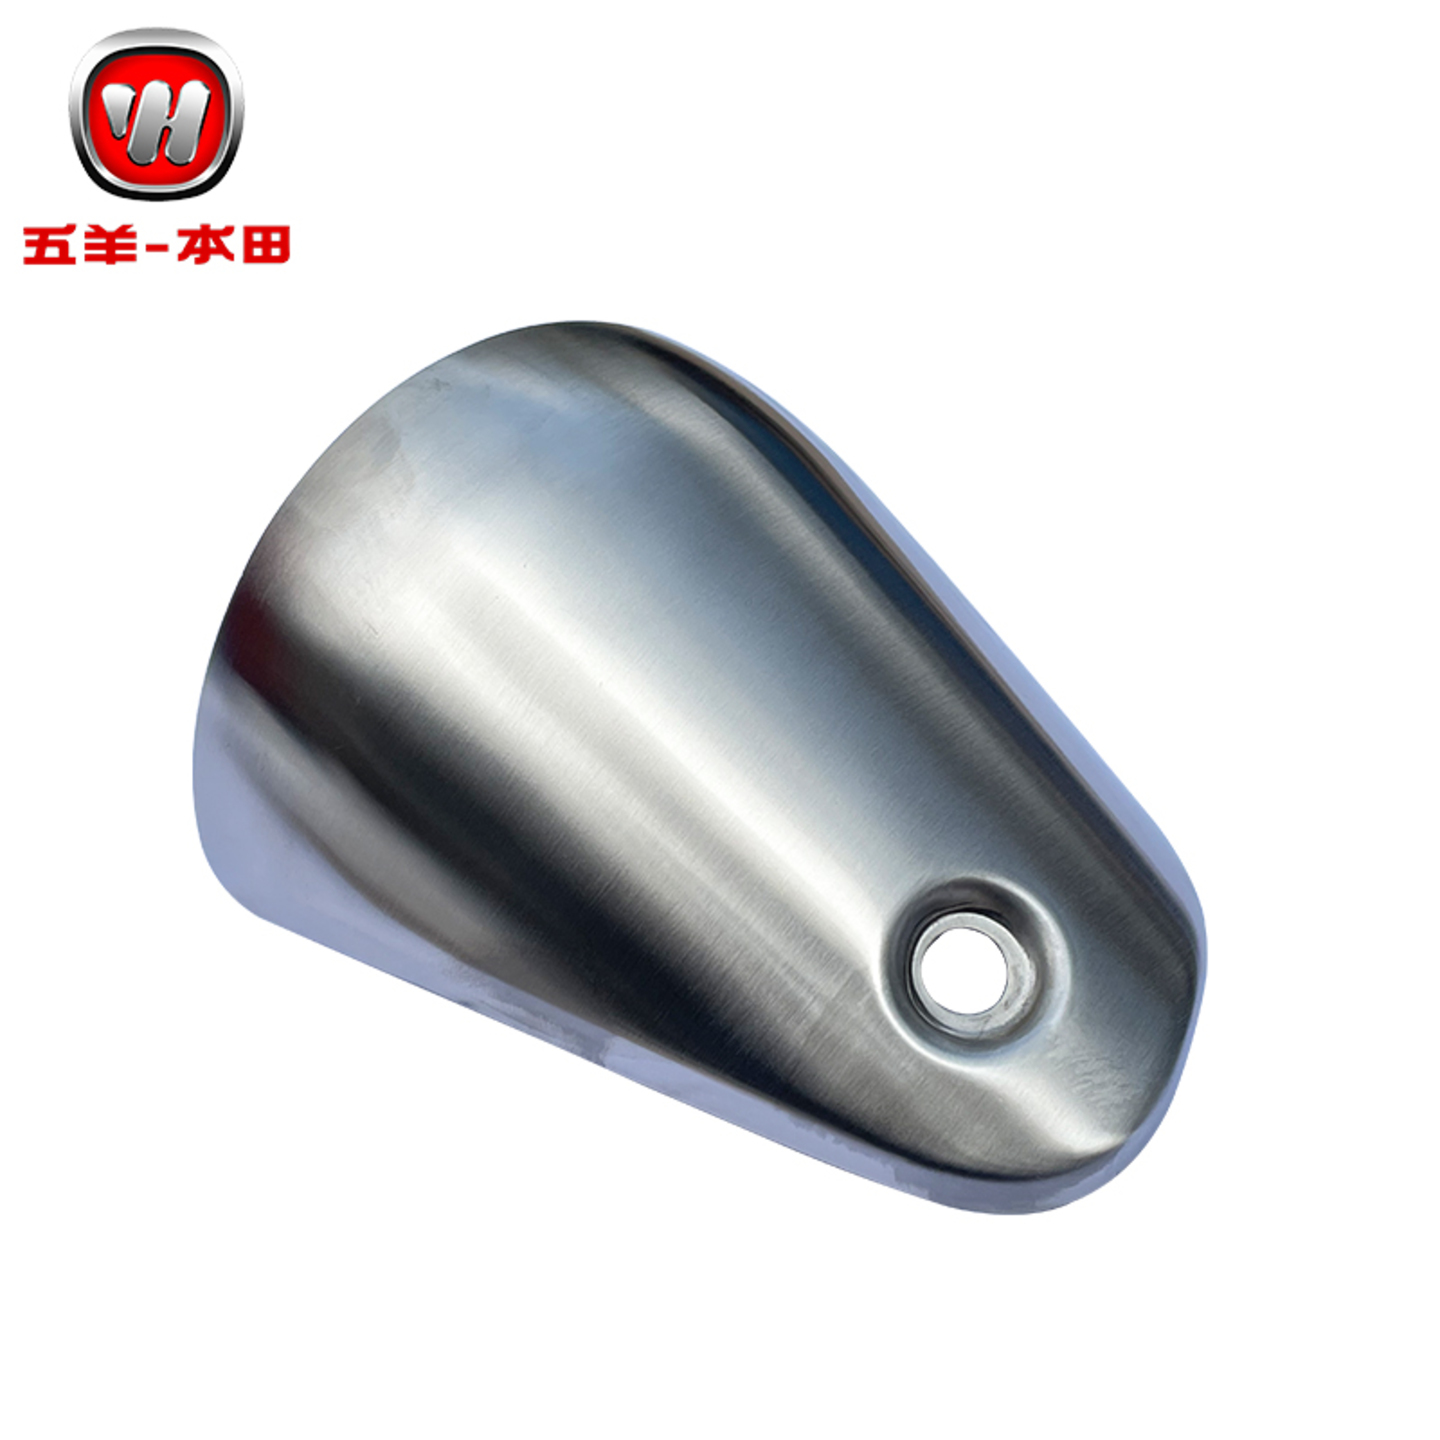 Honda CB190SS heat protector protection guard exhaust shield cover